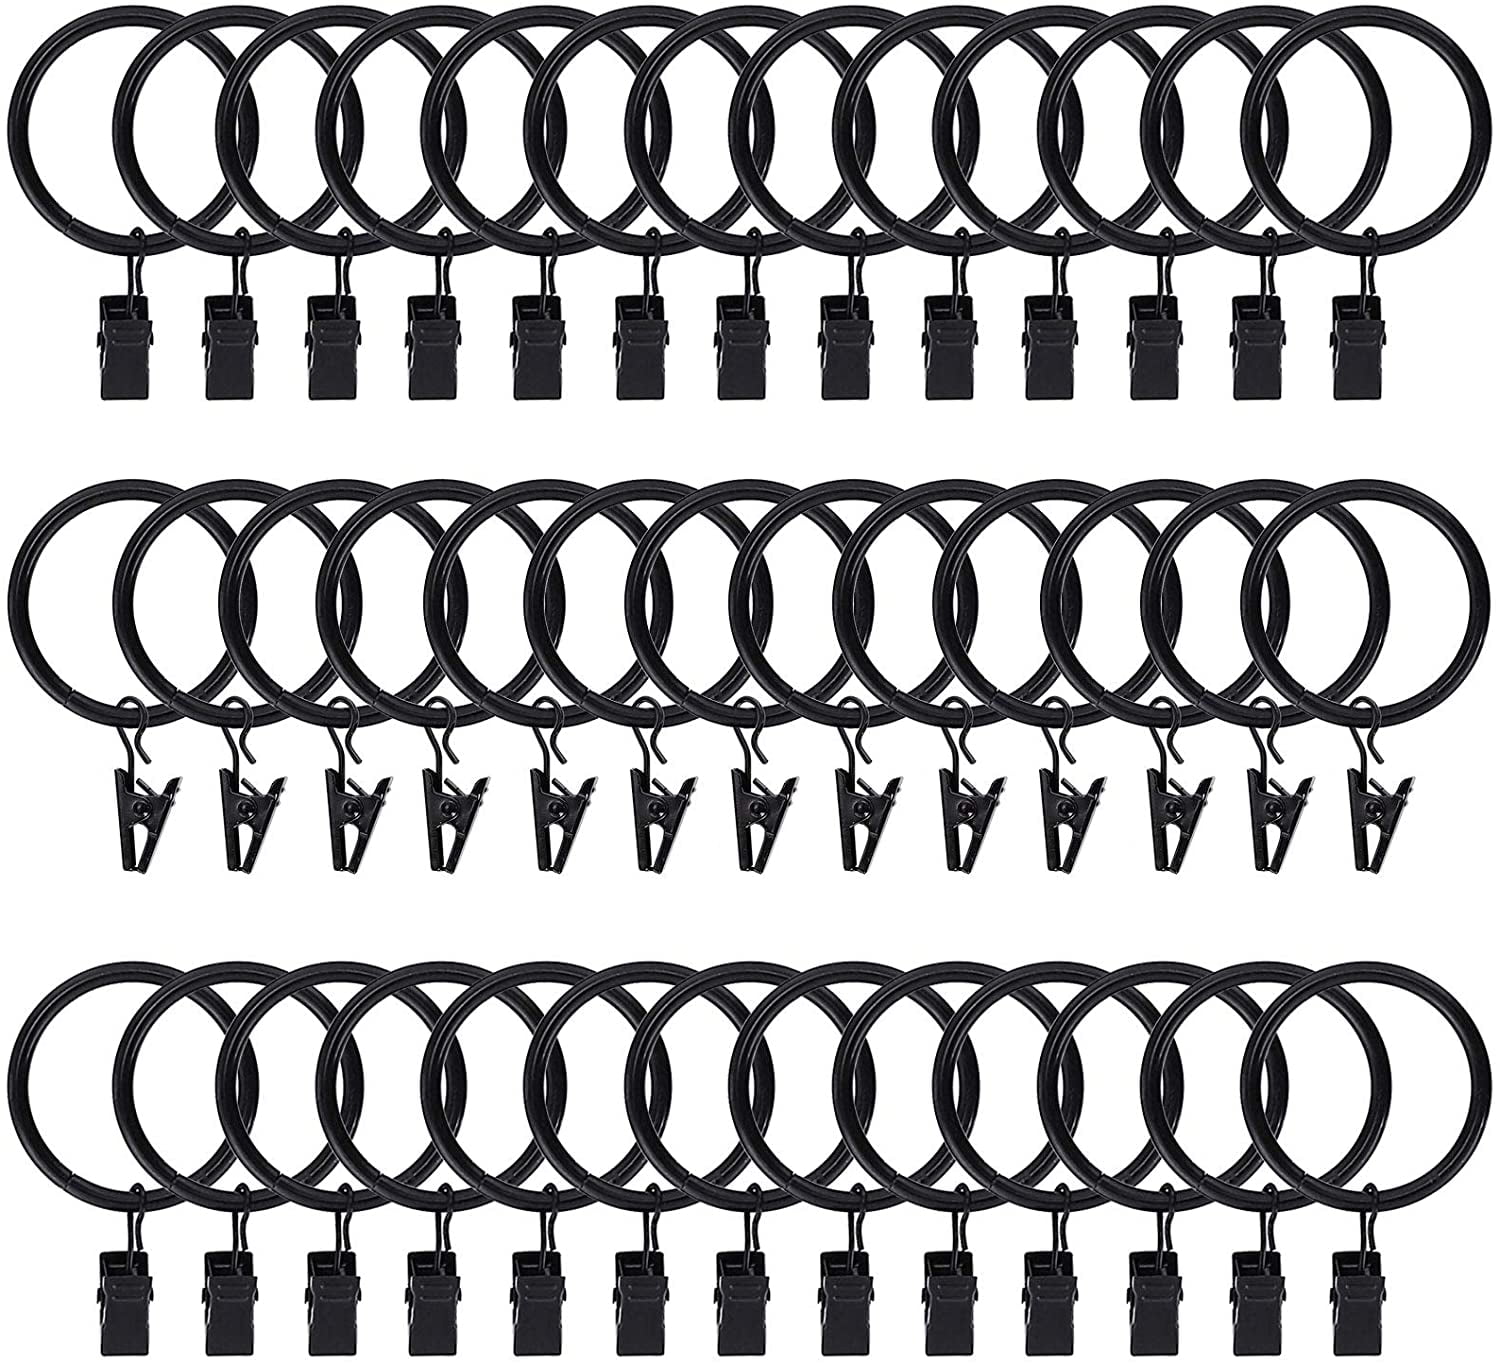 40 Pack Metal Curtain Rings With Clips Black Decorative Drapery Rustproof Vintag 